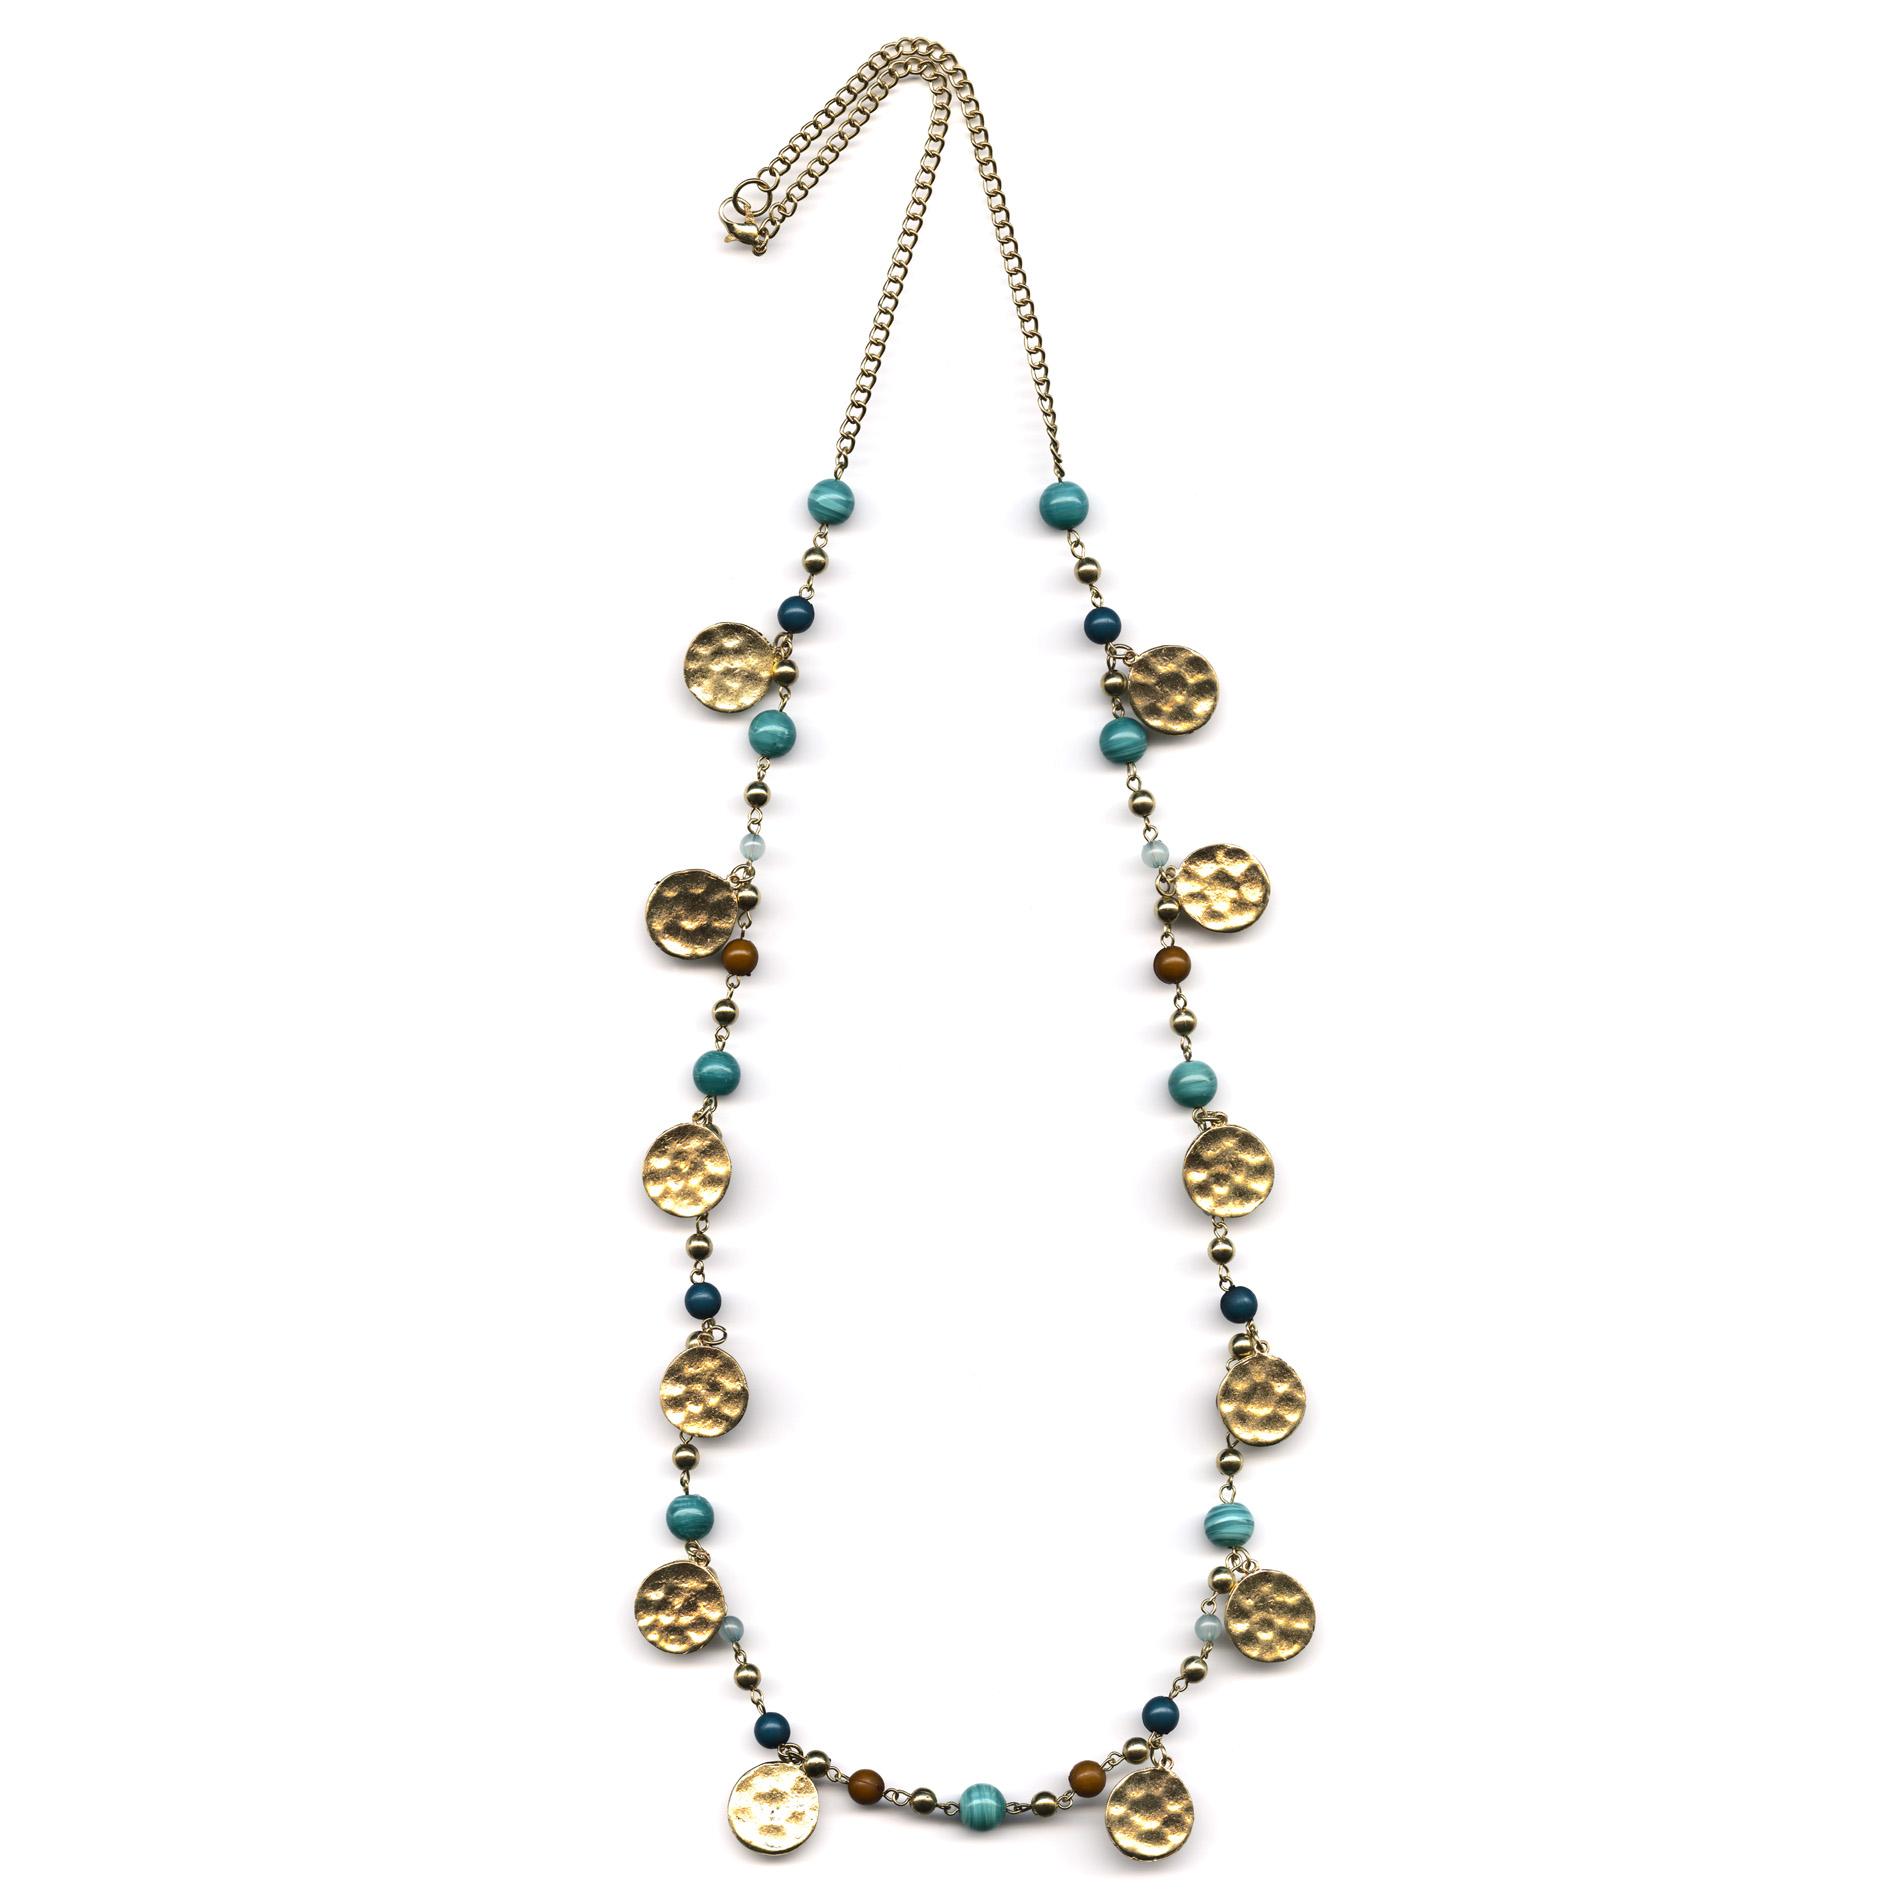 Jaclyn Smith Women's Beaded Medallion Necklace - Multicolored